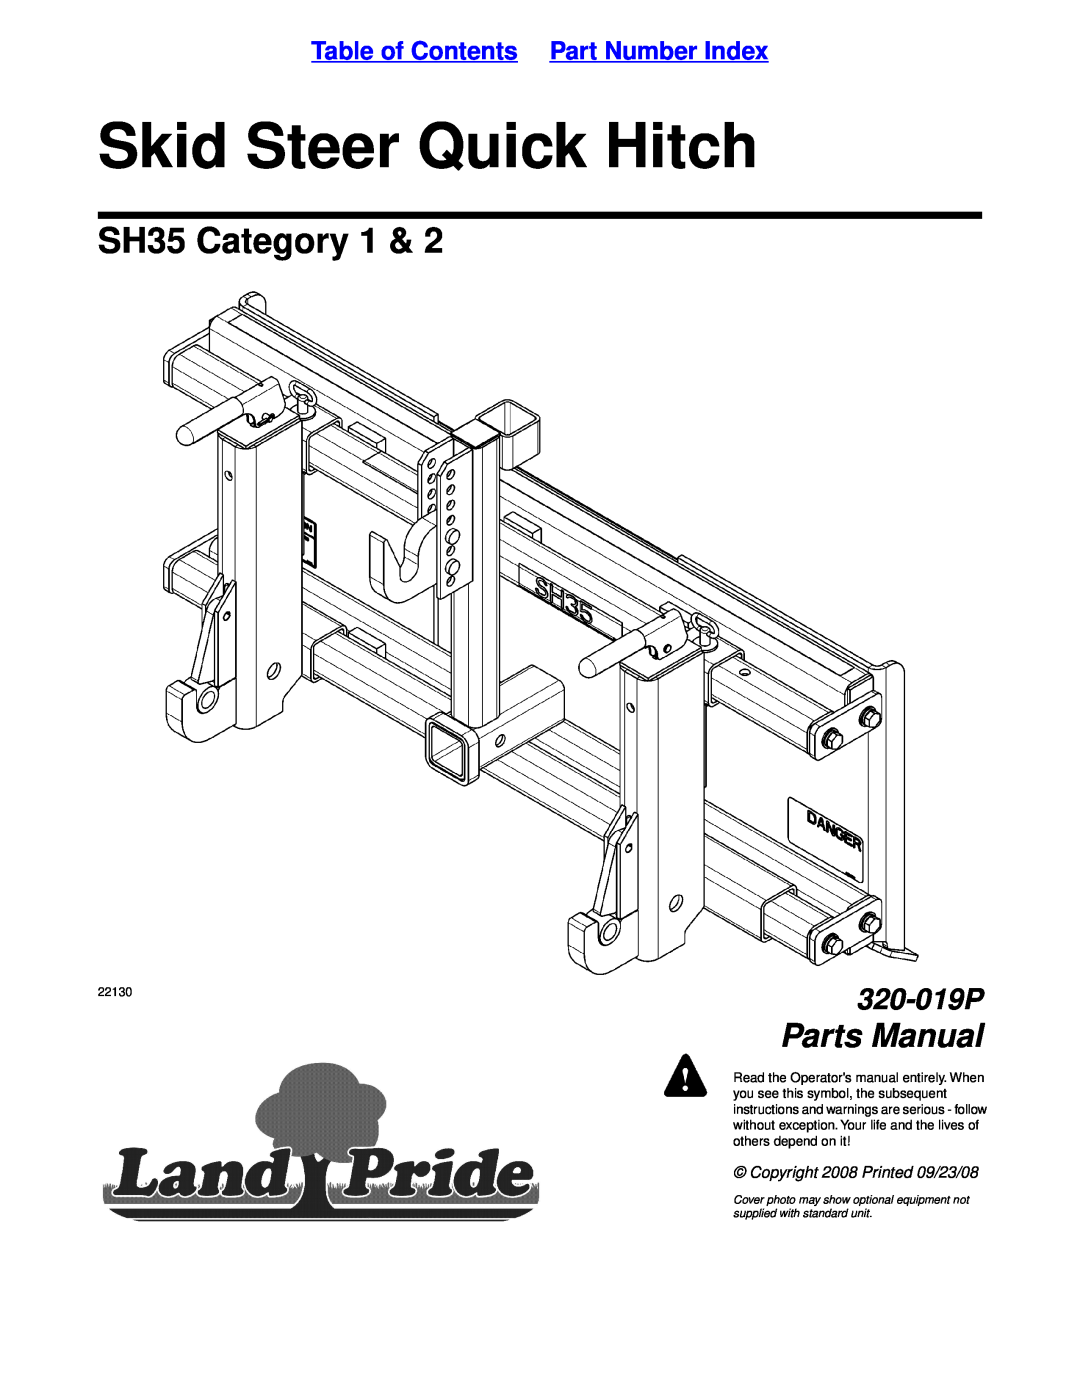 Land Pride manual Table of Contents Part Number Index, Skid Steer Quick Hitch, SH35 Category, Parts Manual, 320-019P 